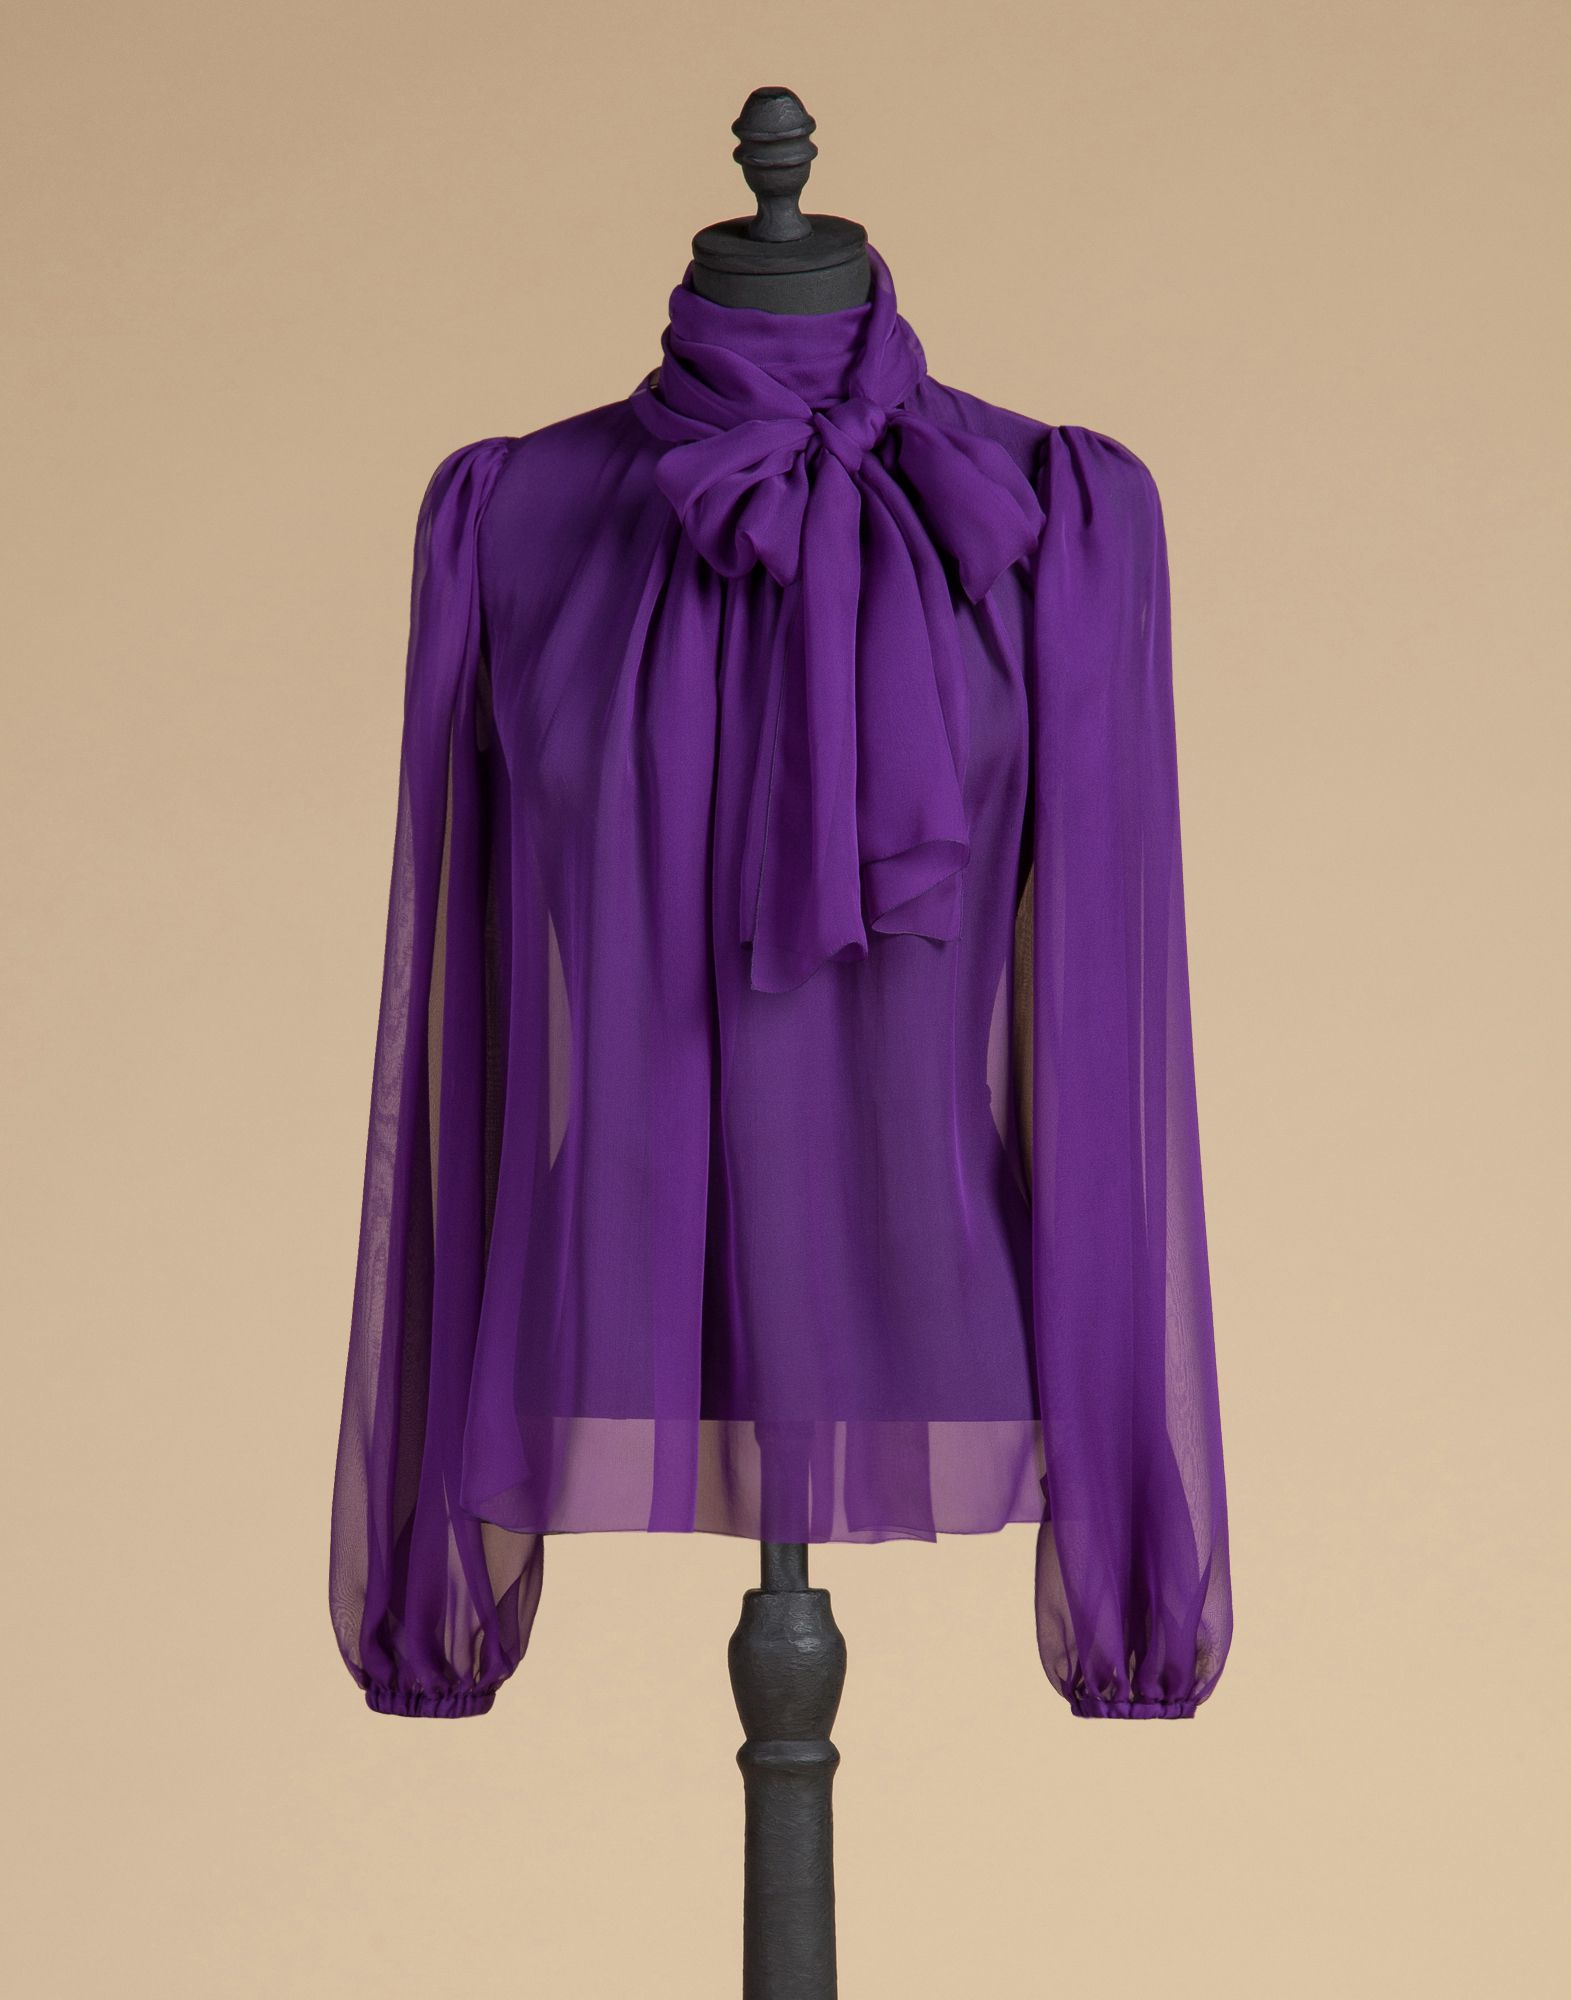 Lyst - Dolce & Gabbana Blouse In Silk Chiffon With Bow in Purple